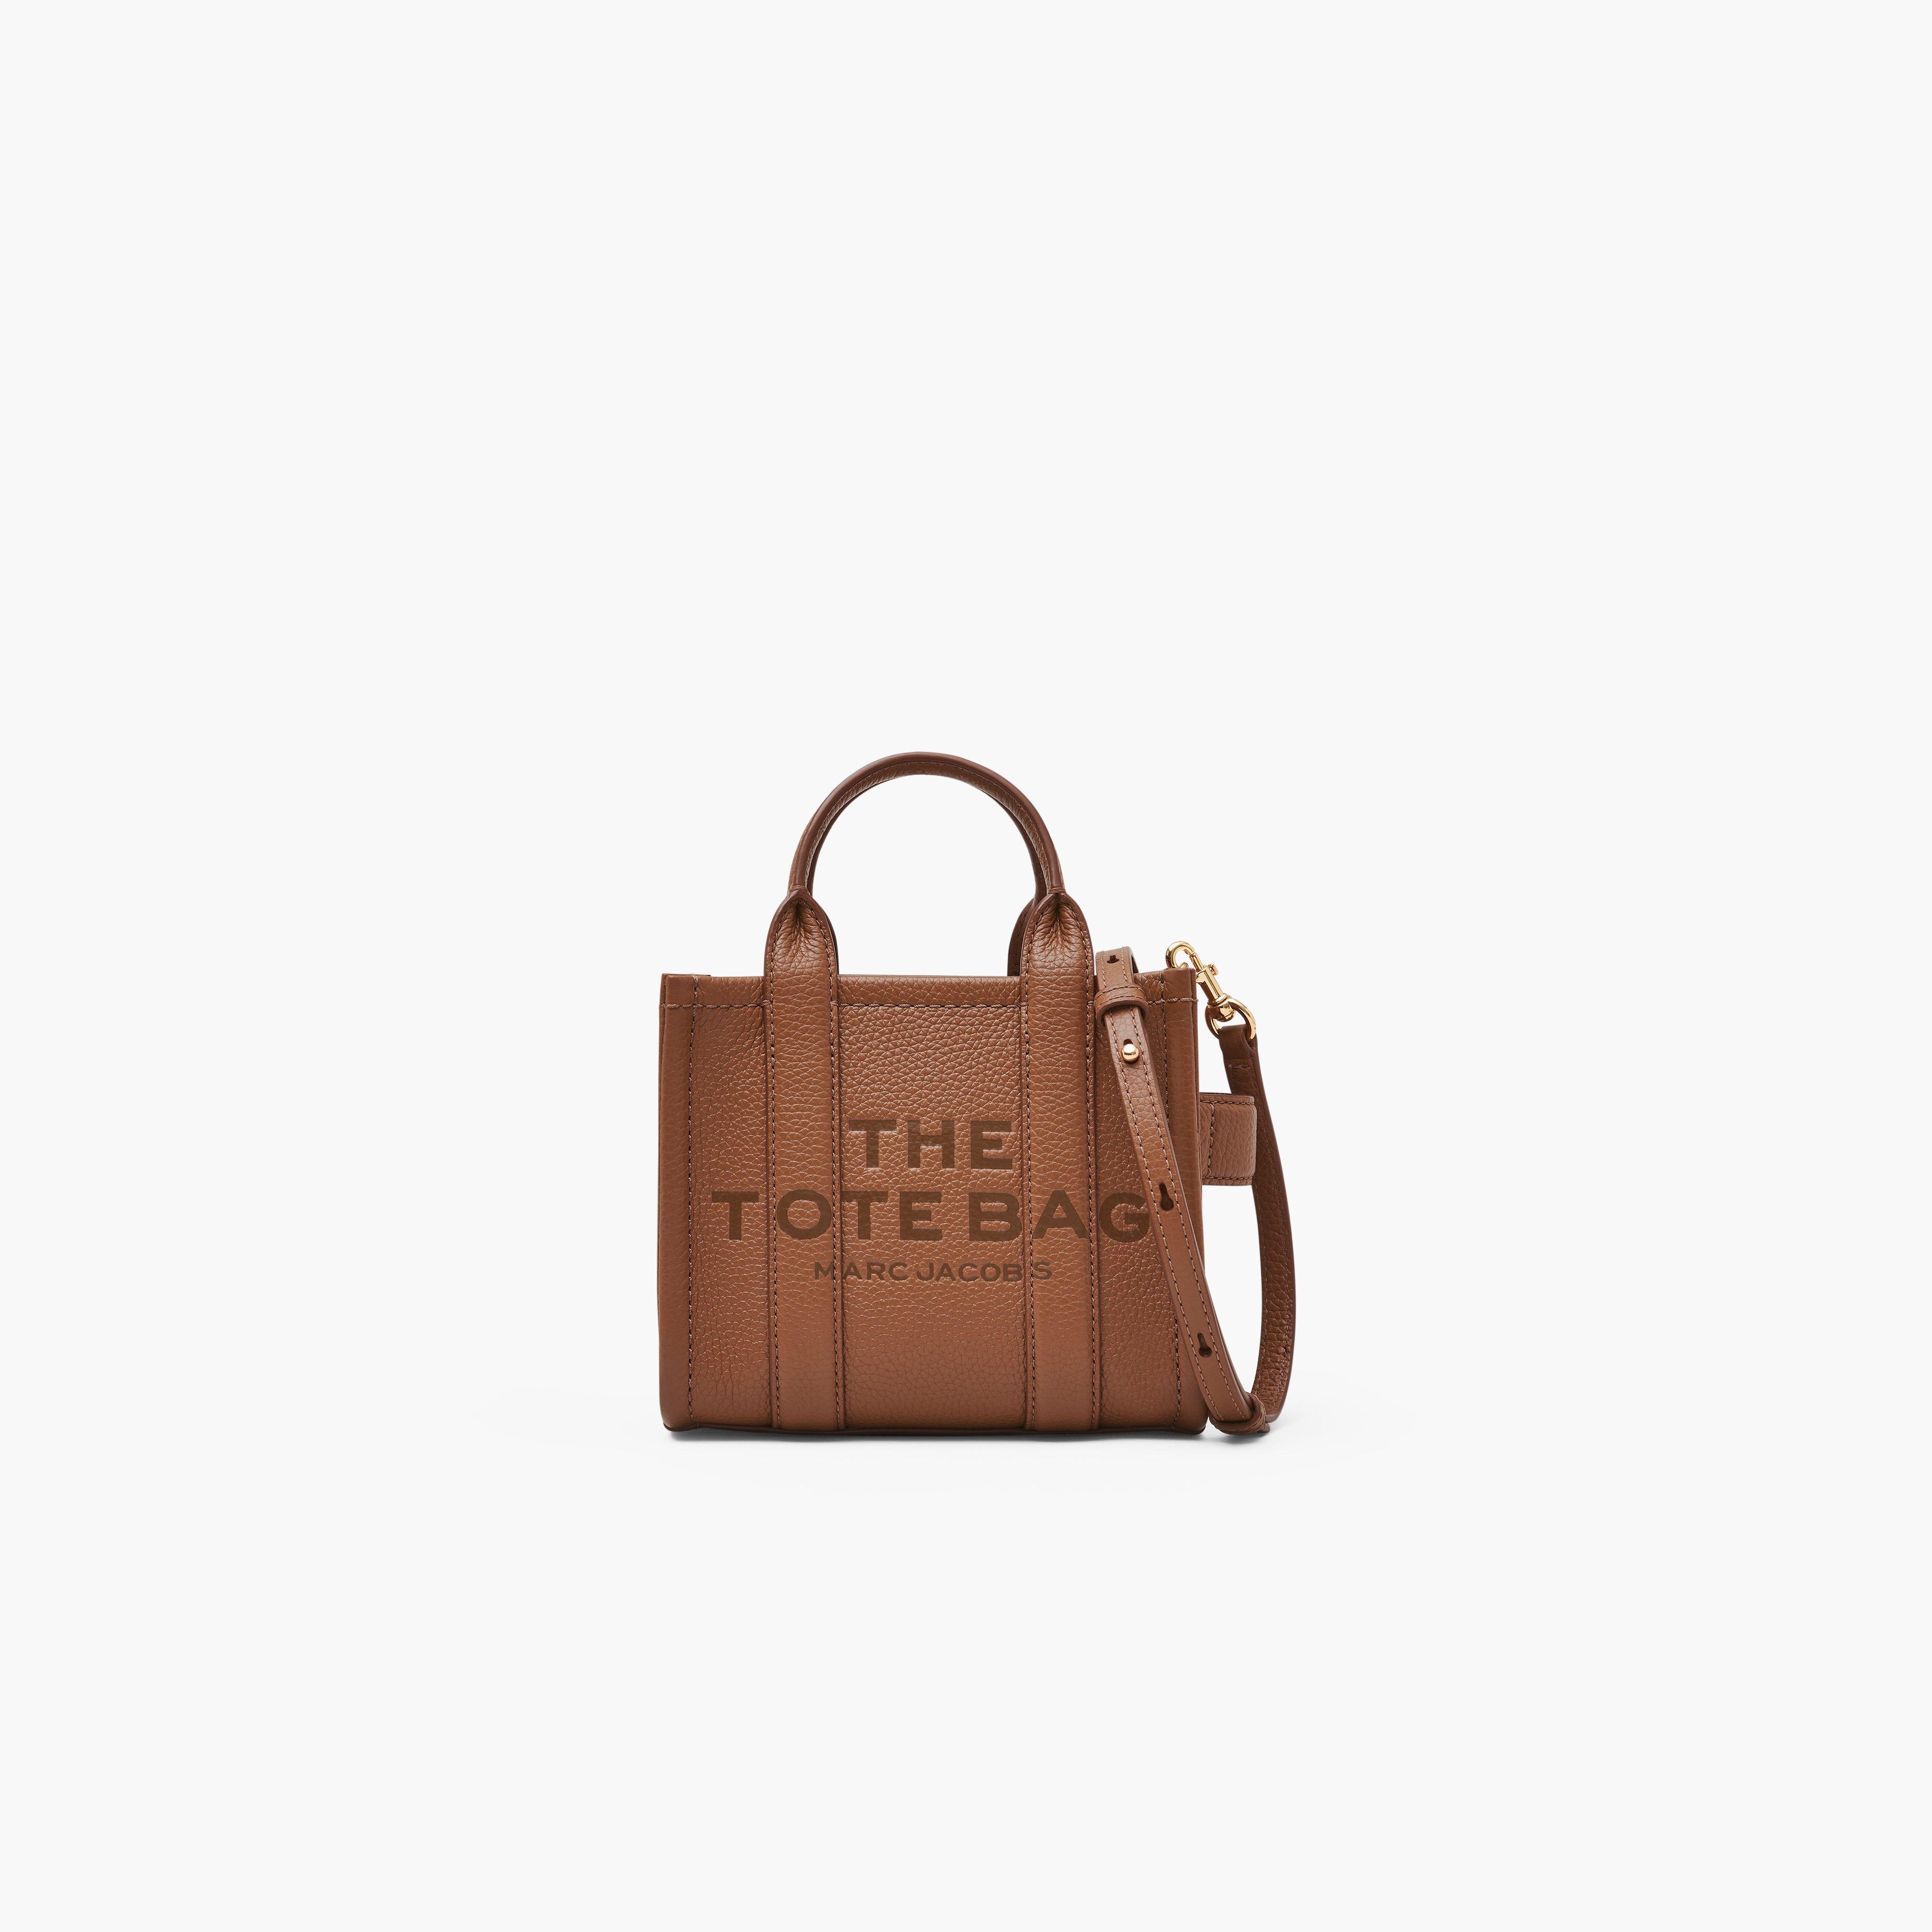 Marc by Marc jacobs The Leather Mini Tote Bag,ARGAN OIL